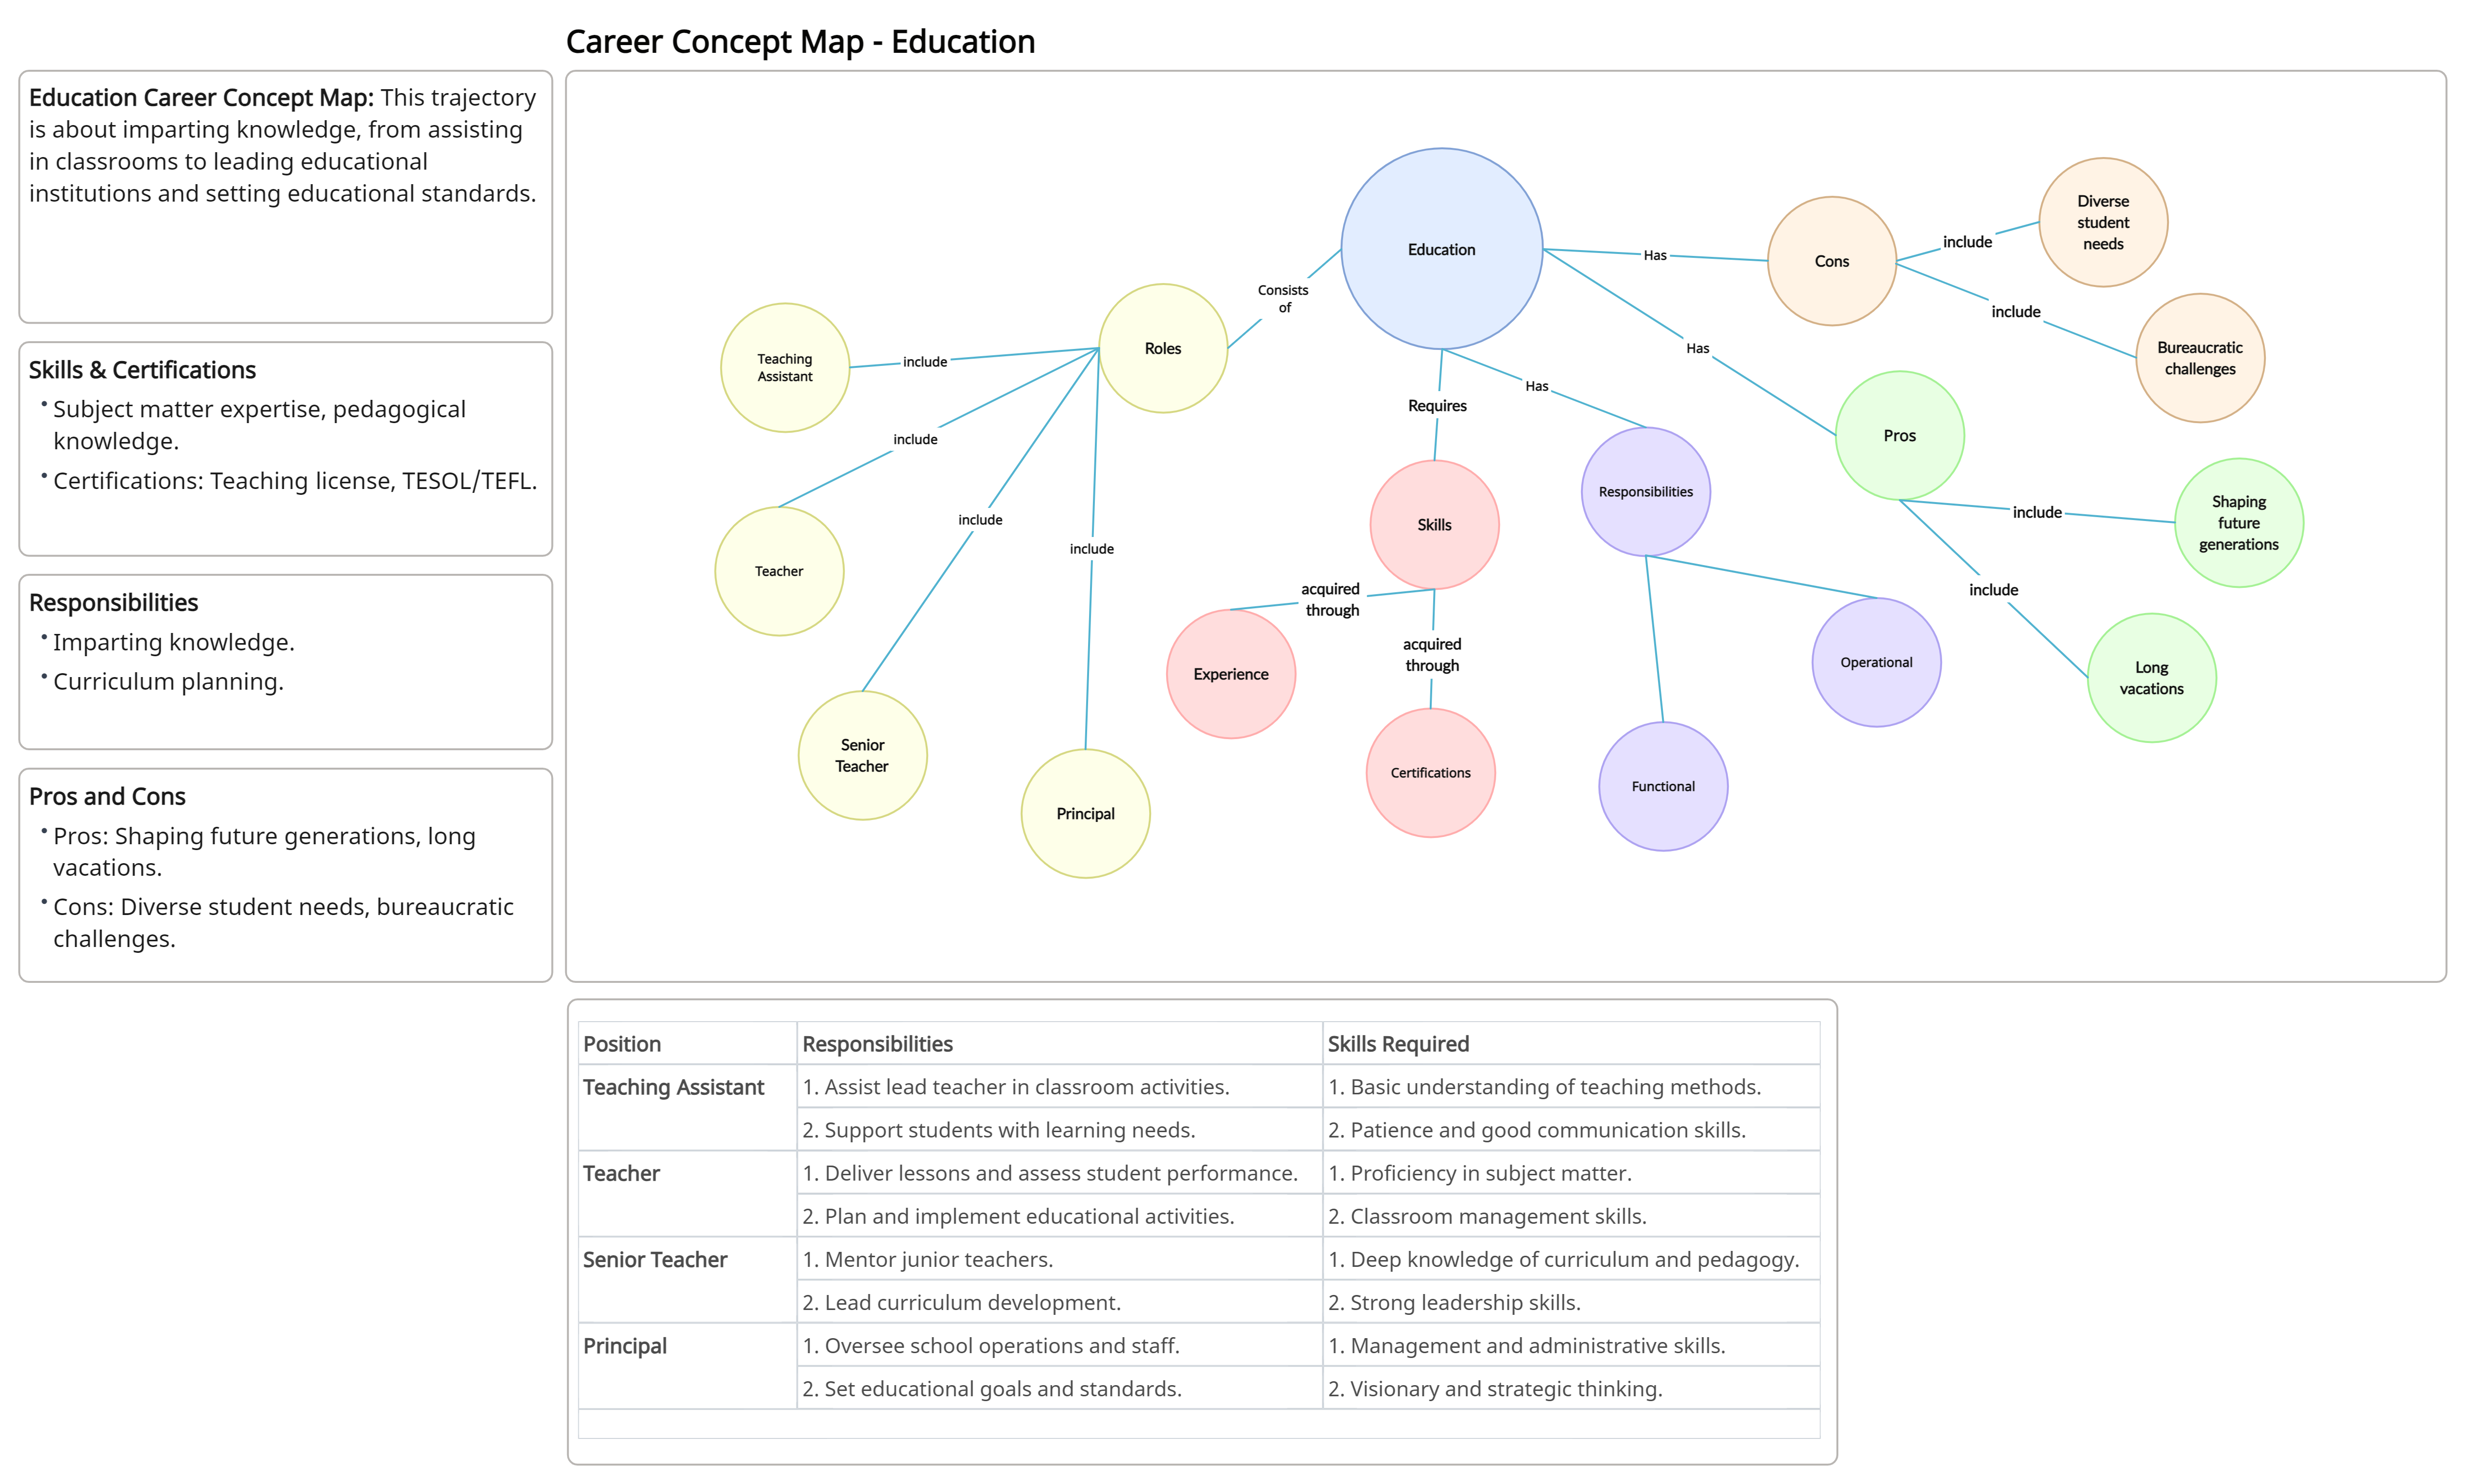 Education Career Concept Map